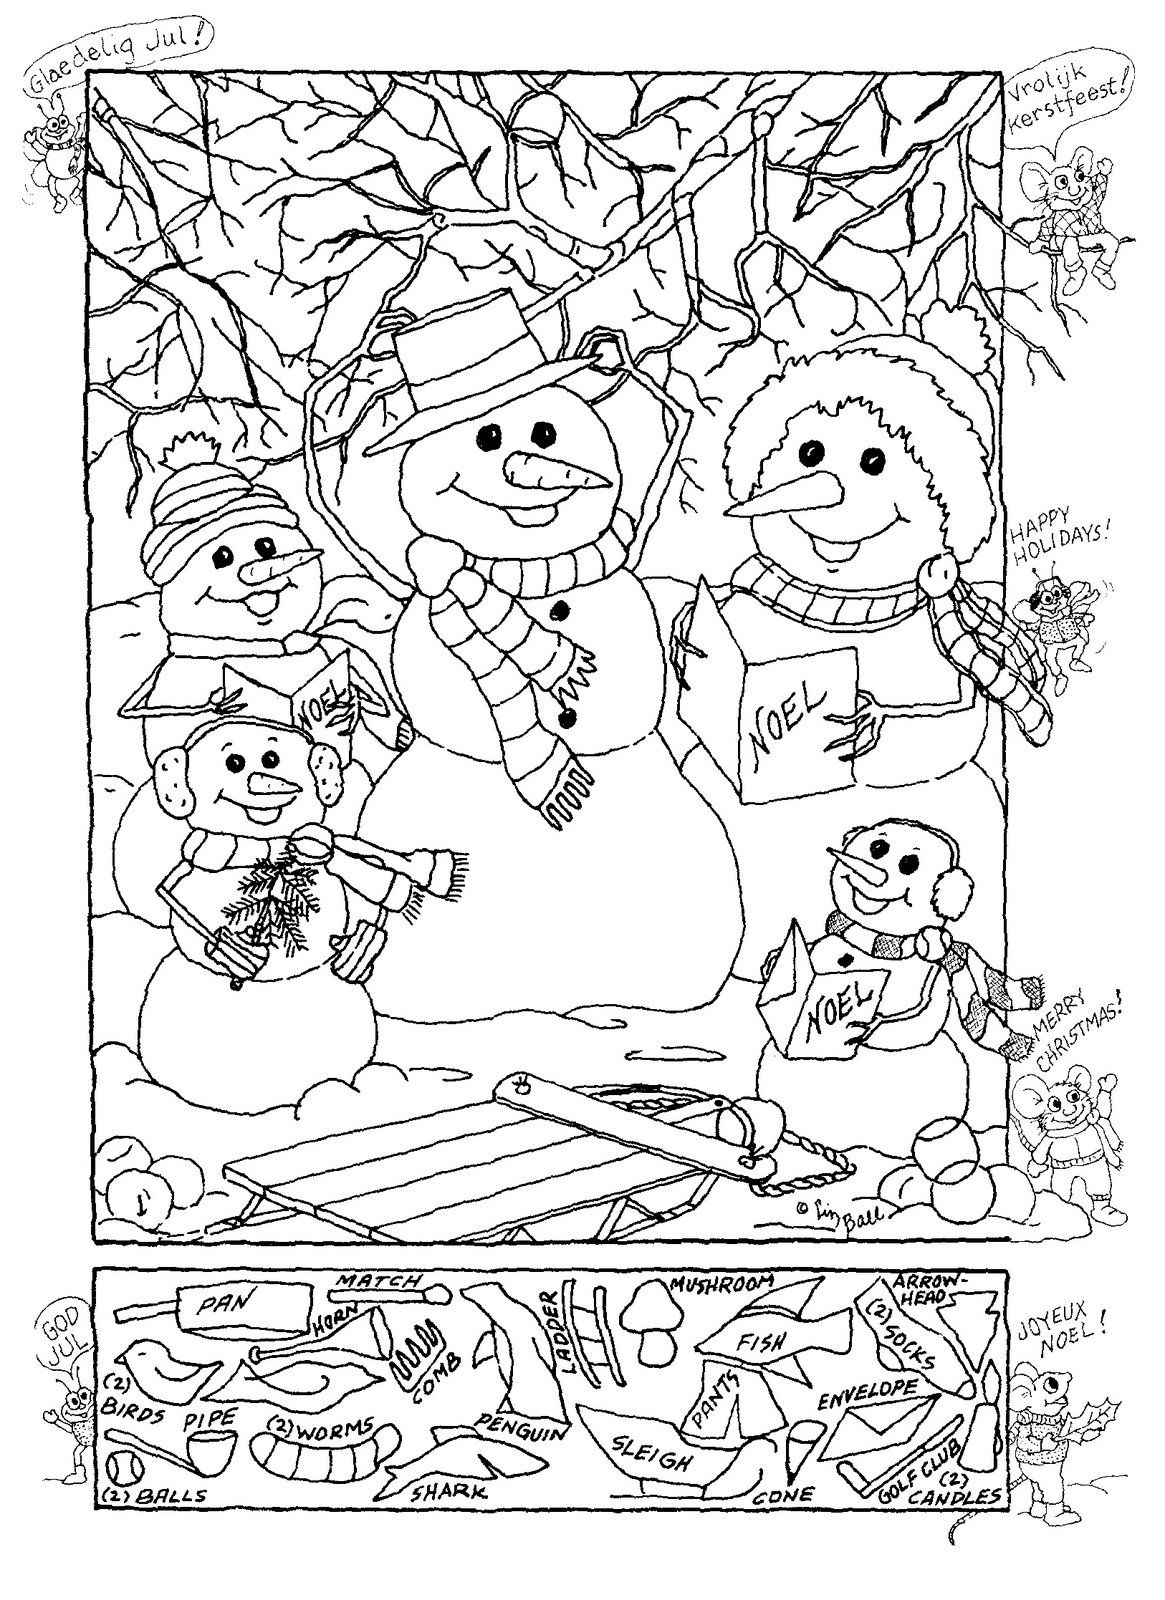 Snowman Hidden Picture Puzzle For Christmas! | Christmas